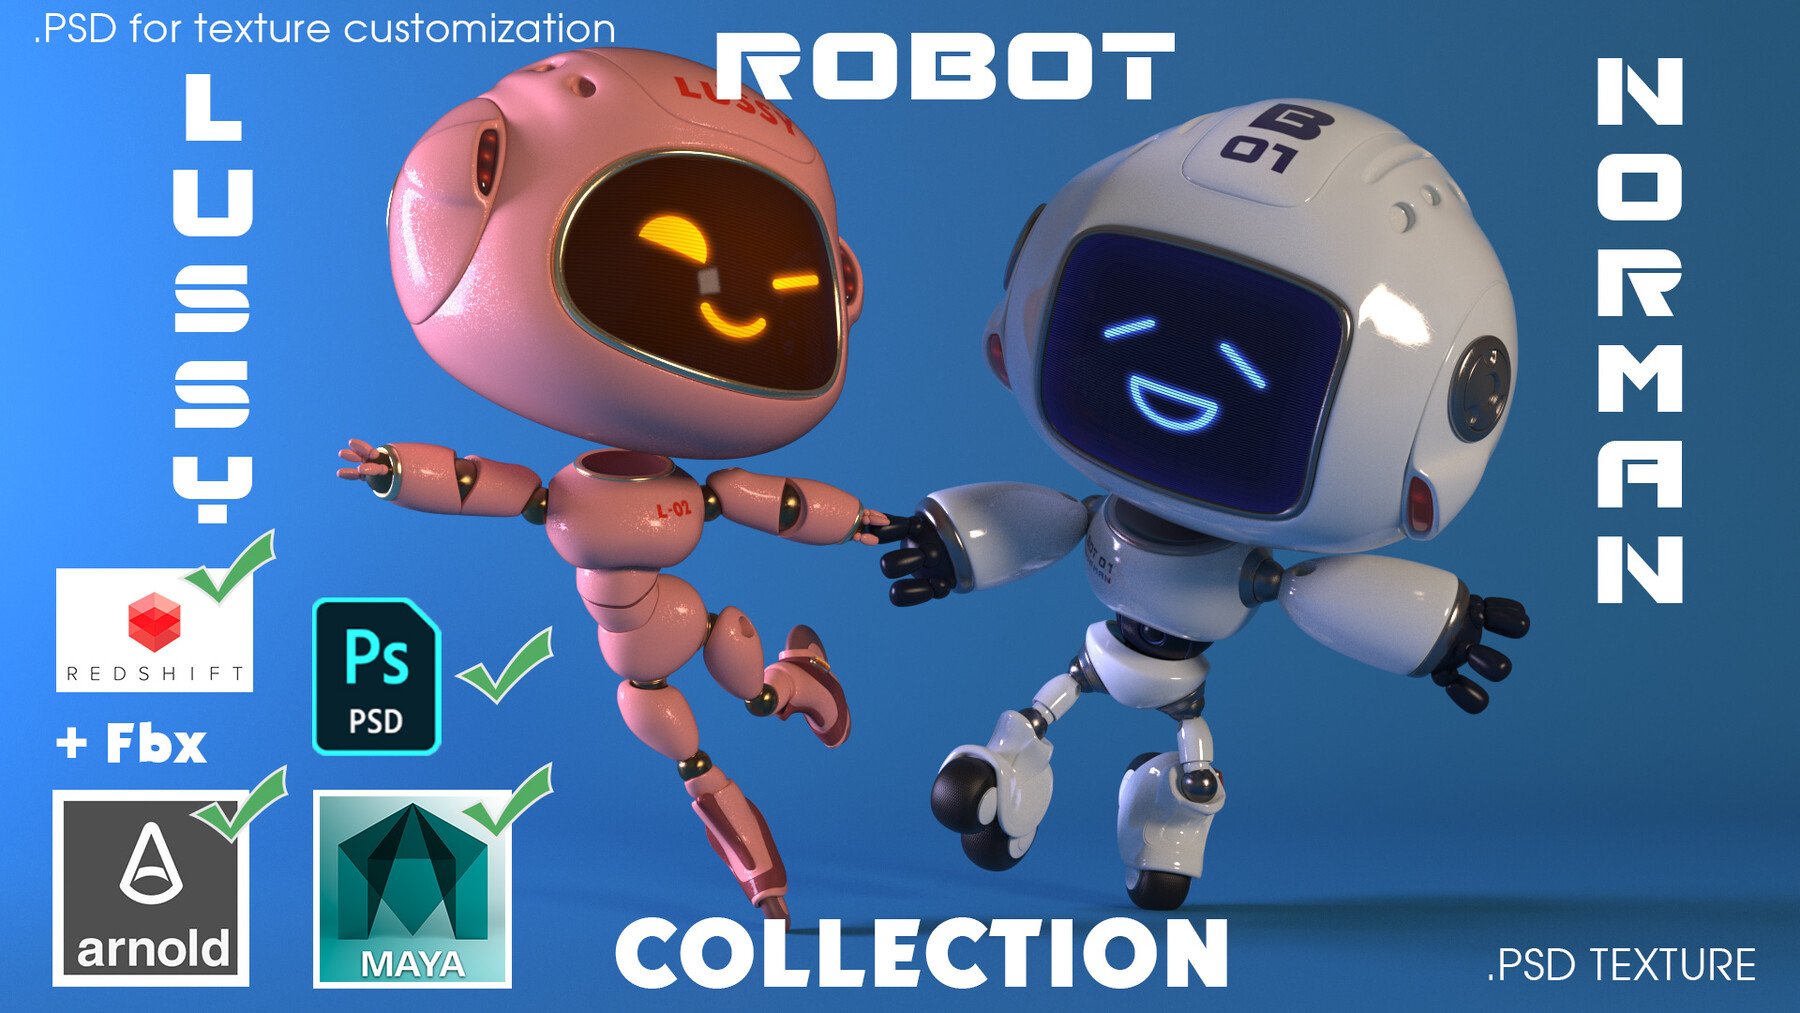 ArtStation - Robot collection: Norman and Lussy | Resources